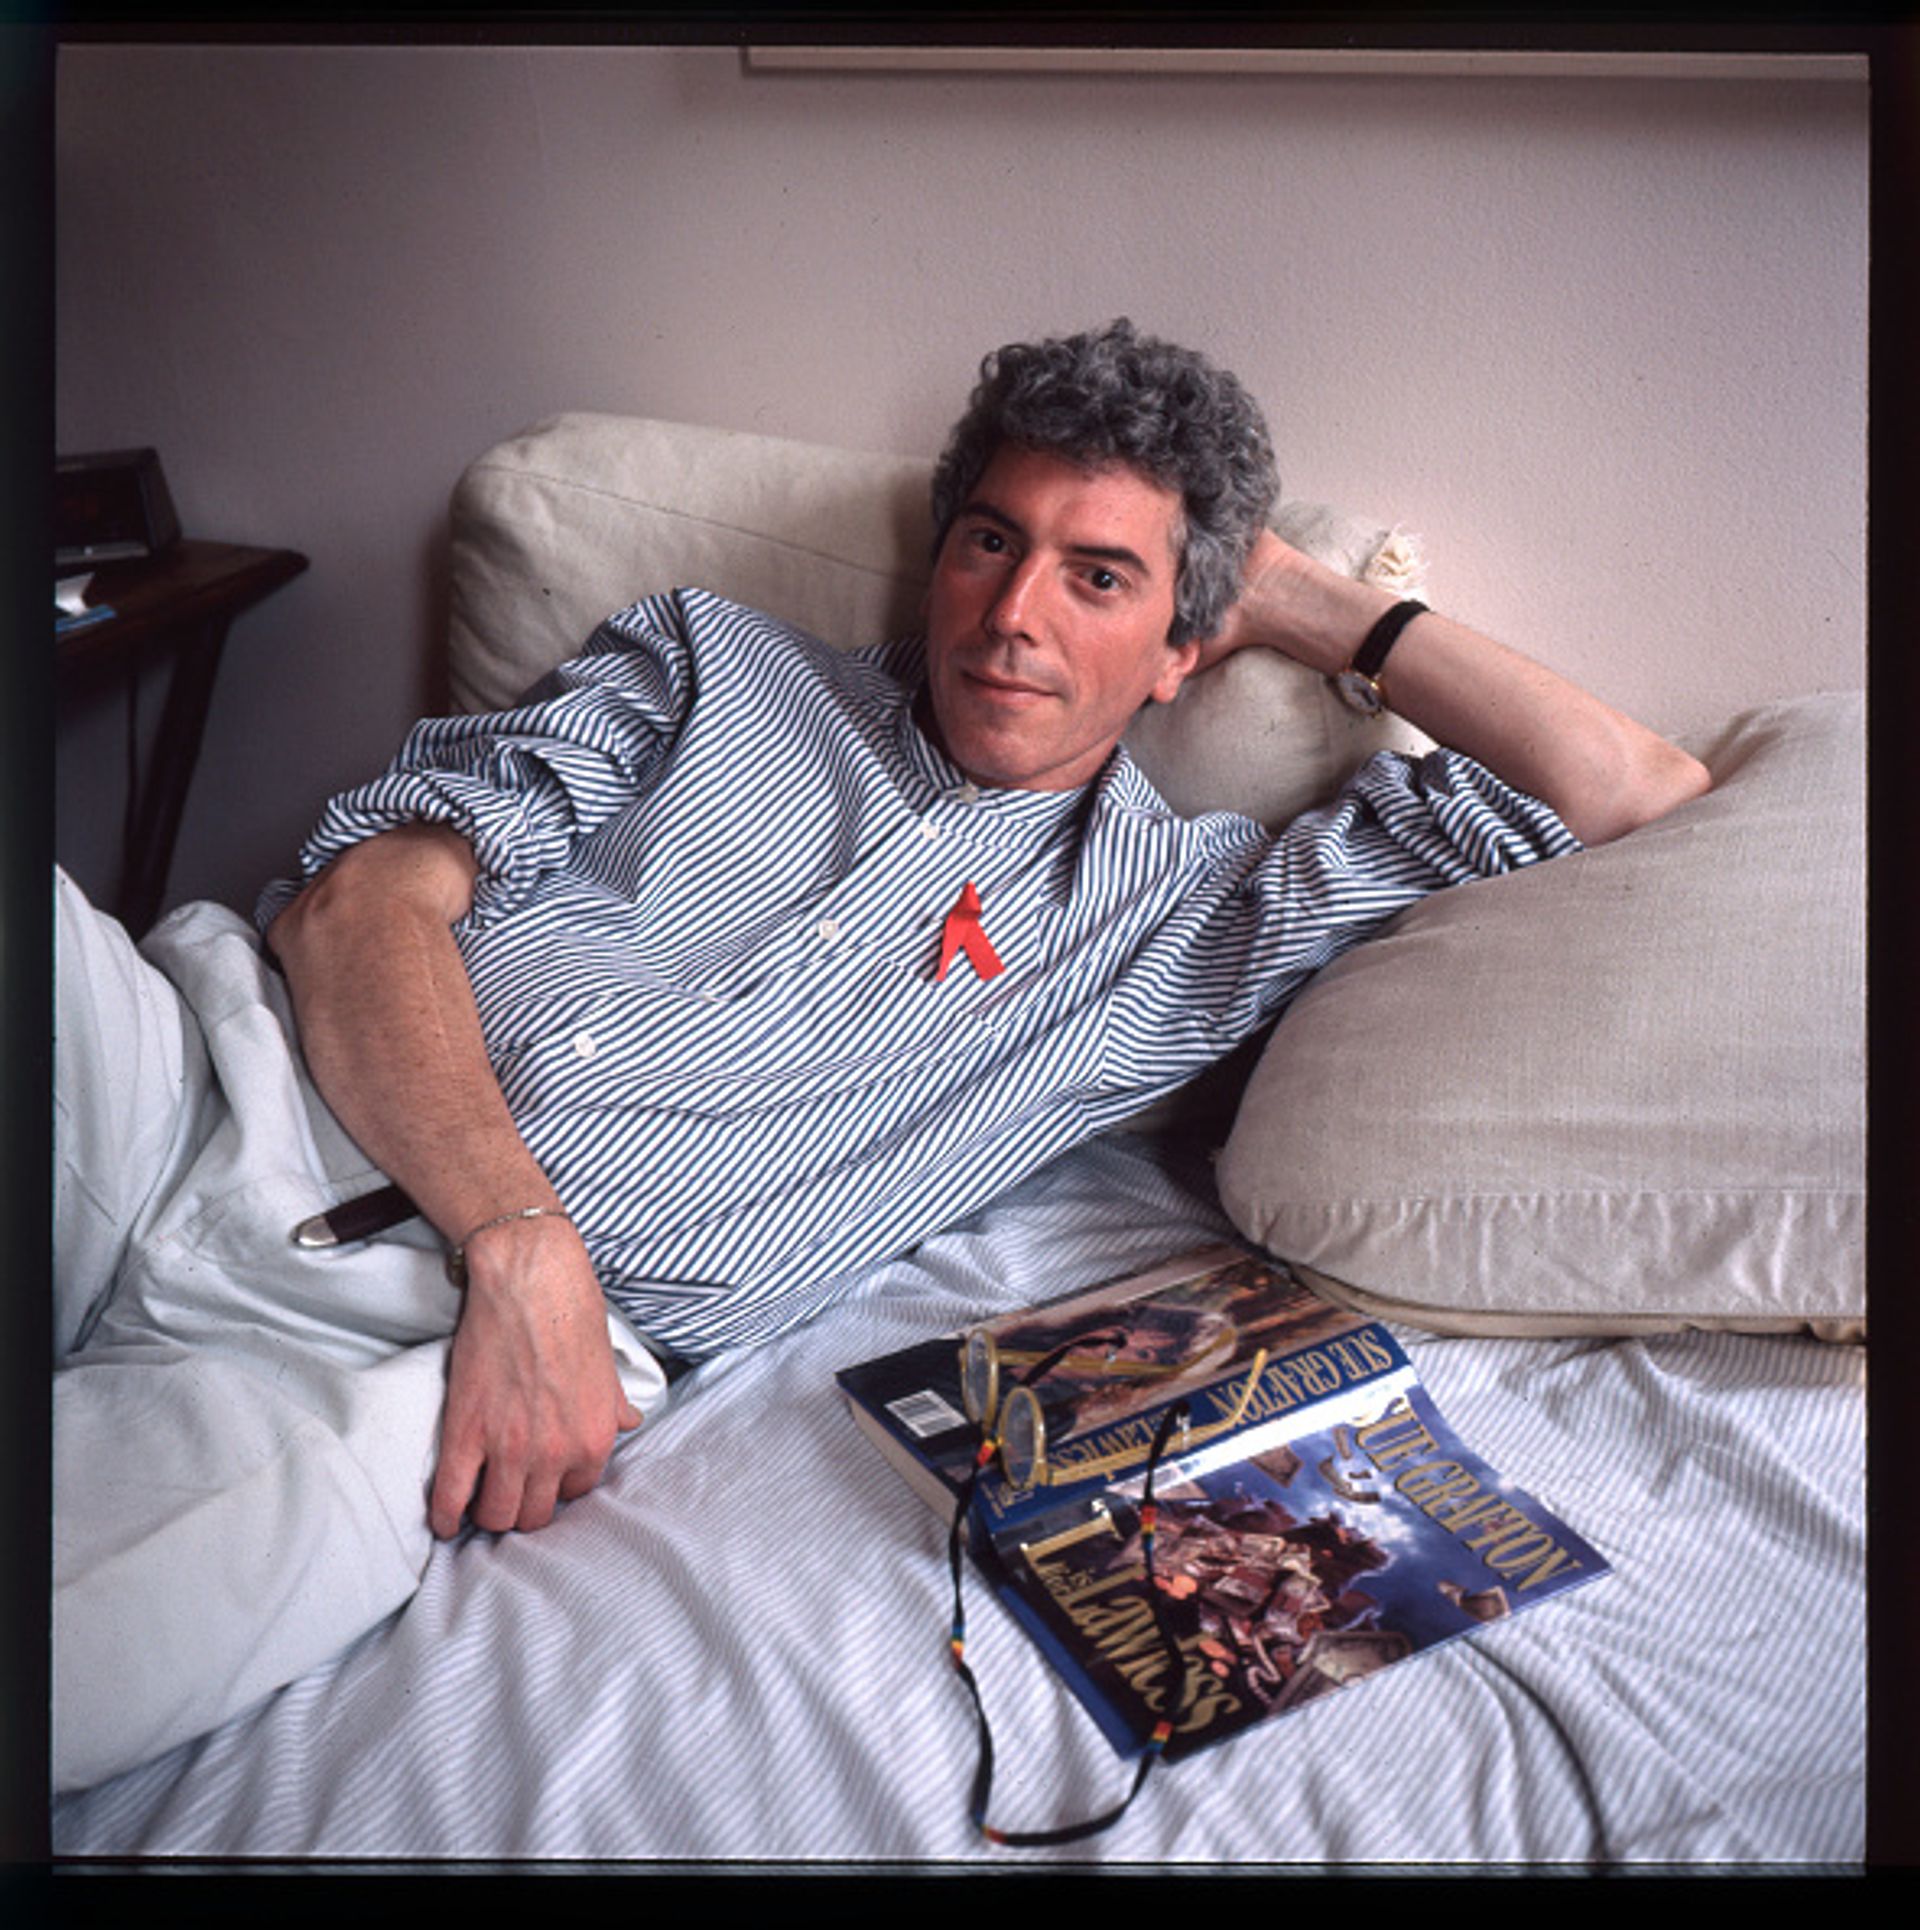 Patrick O'Connell at home in New York in 1994 Photo: Thomas McGovern / Getty Images